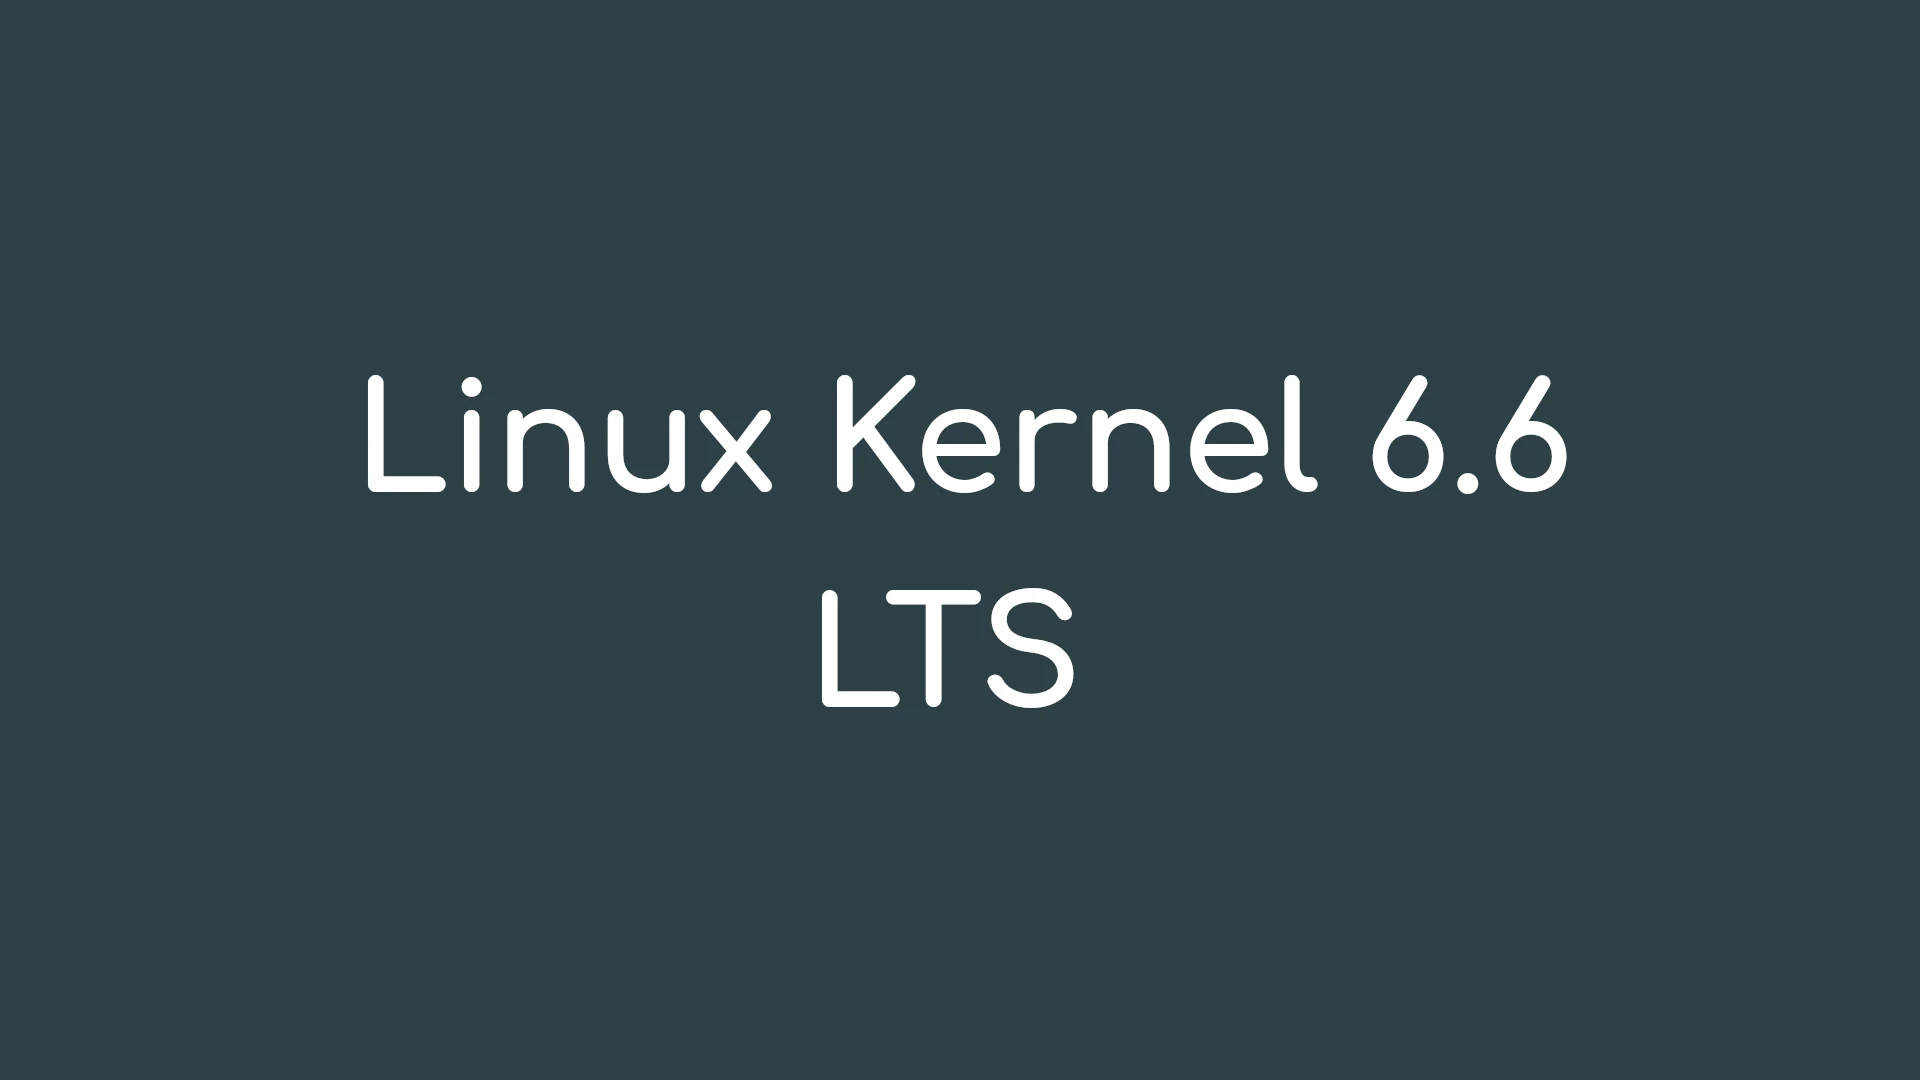 It’s Official: Linux Kernel 6.6 Will Be LTS, Supported Until December 2026